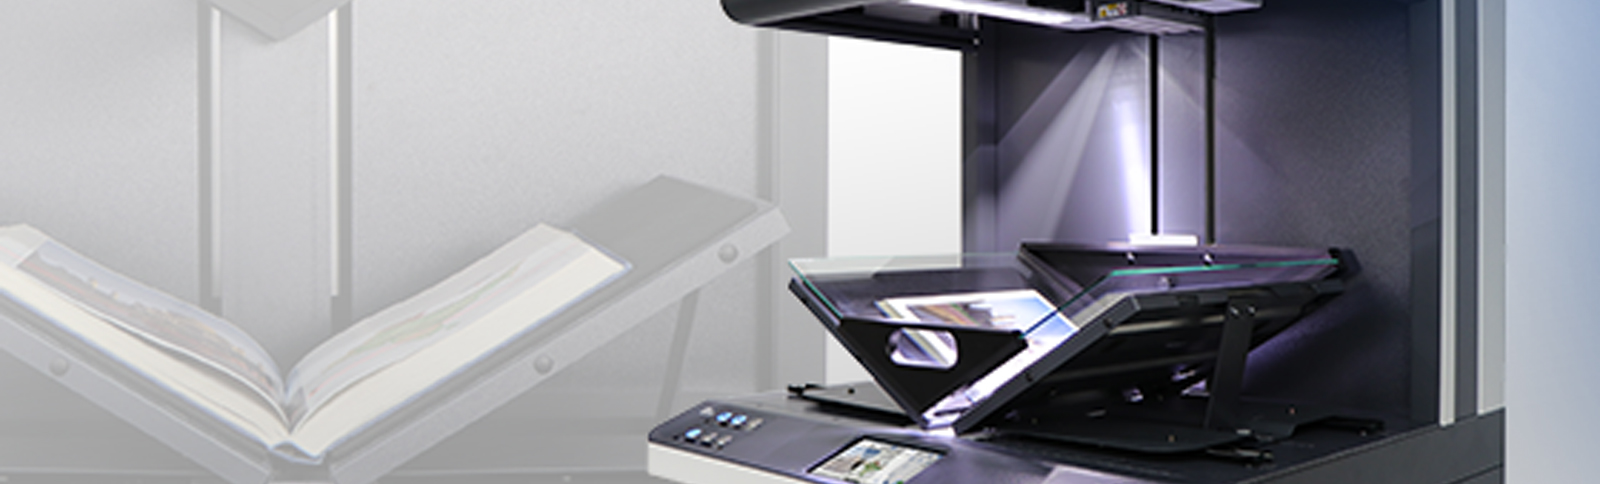 Bookeye Book Scanning Services in Oxfordshire UK